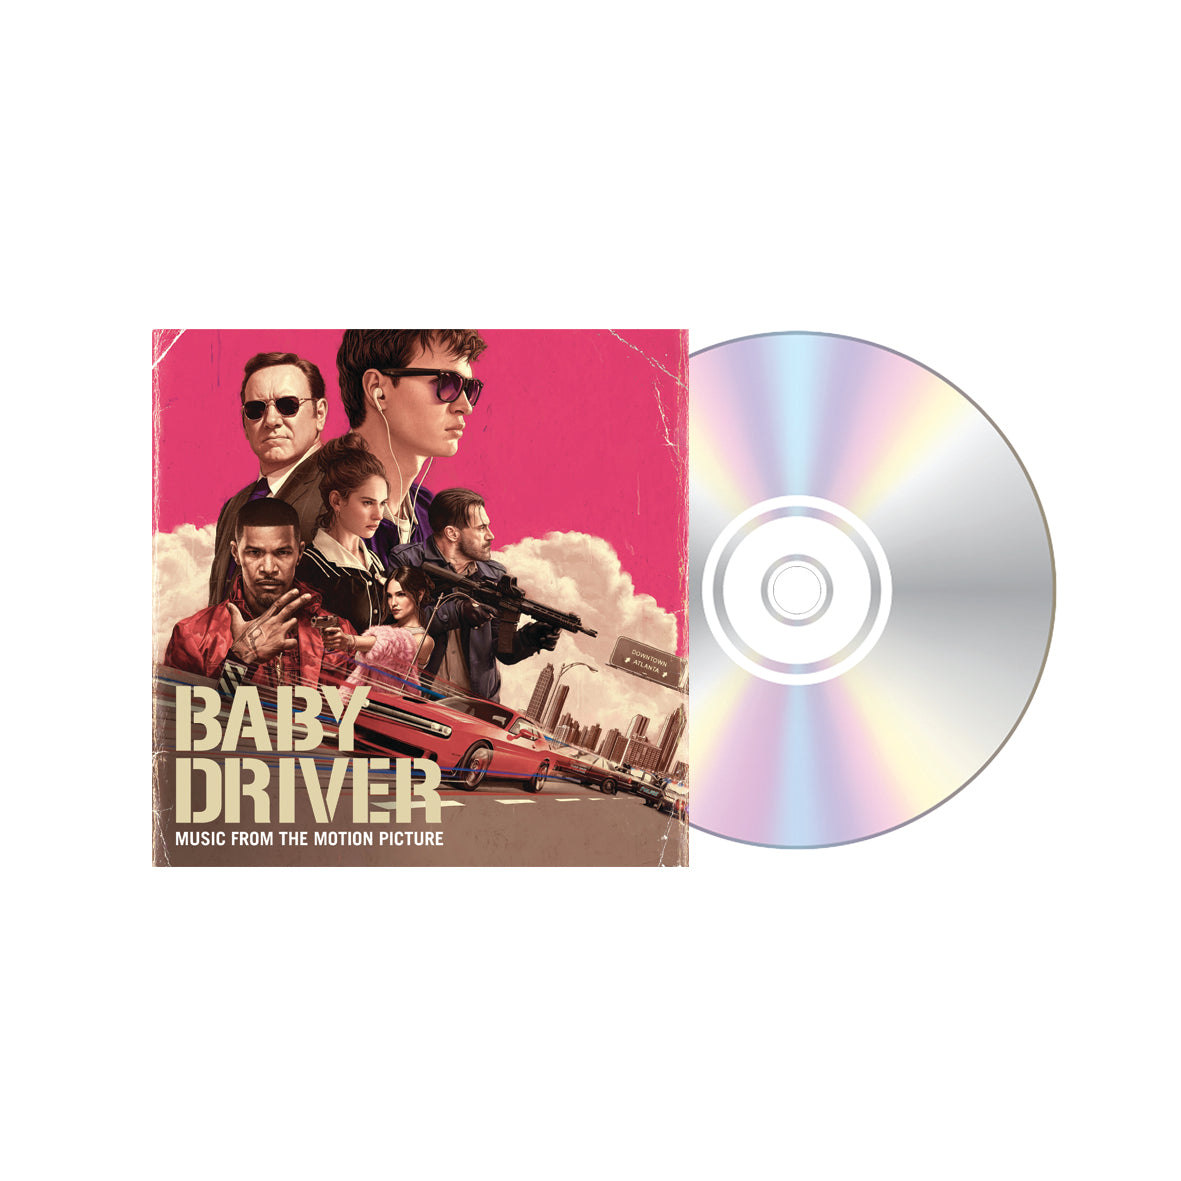 BABY DRIVER (MUSIC FROM THE MOTION PICTURE) CD